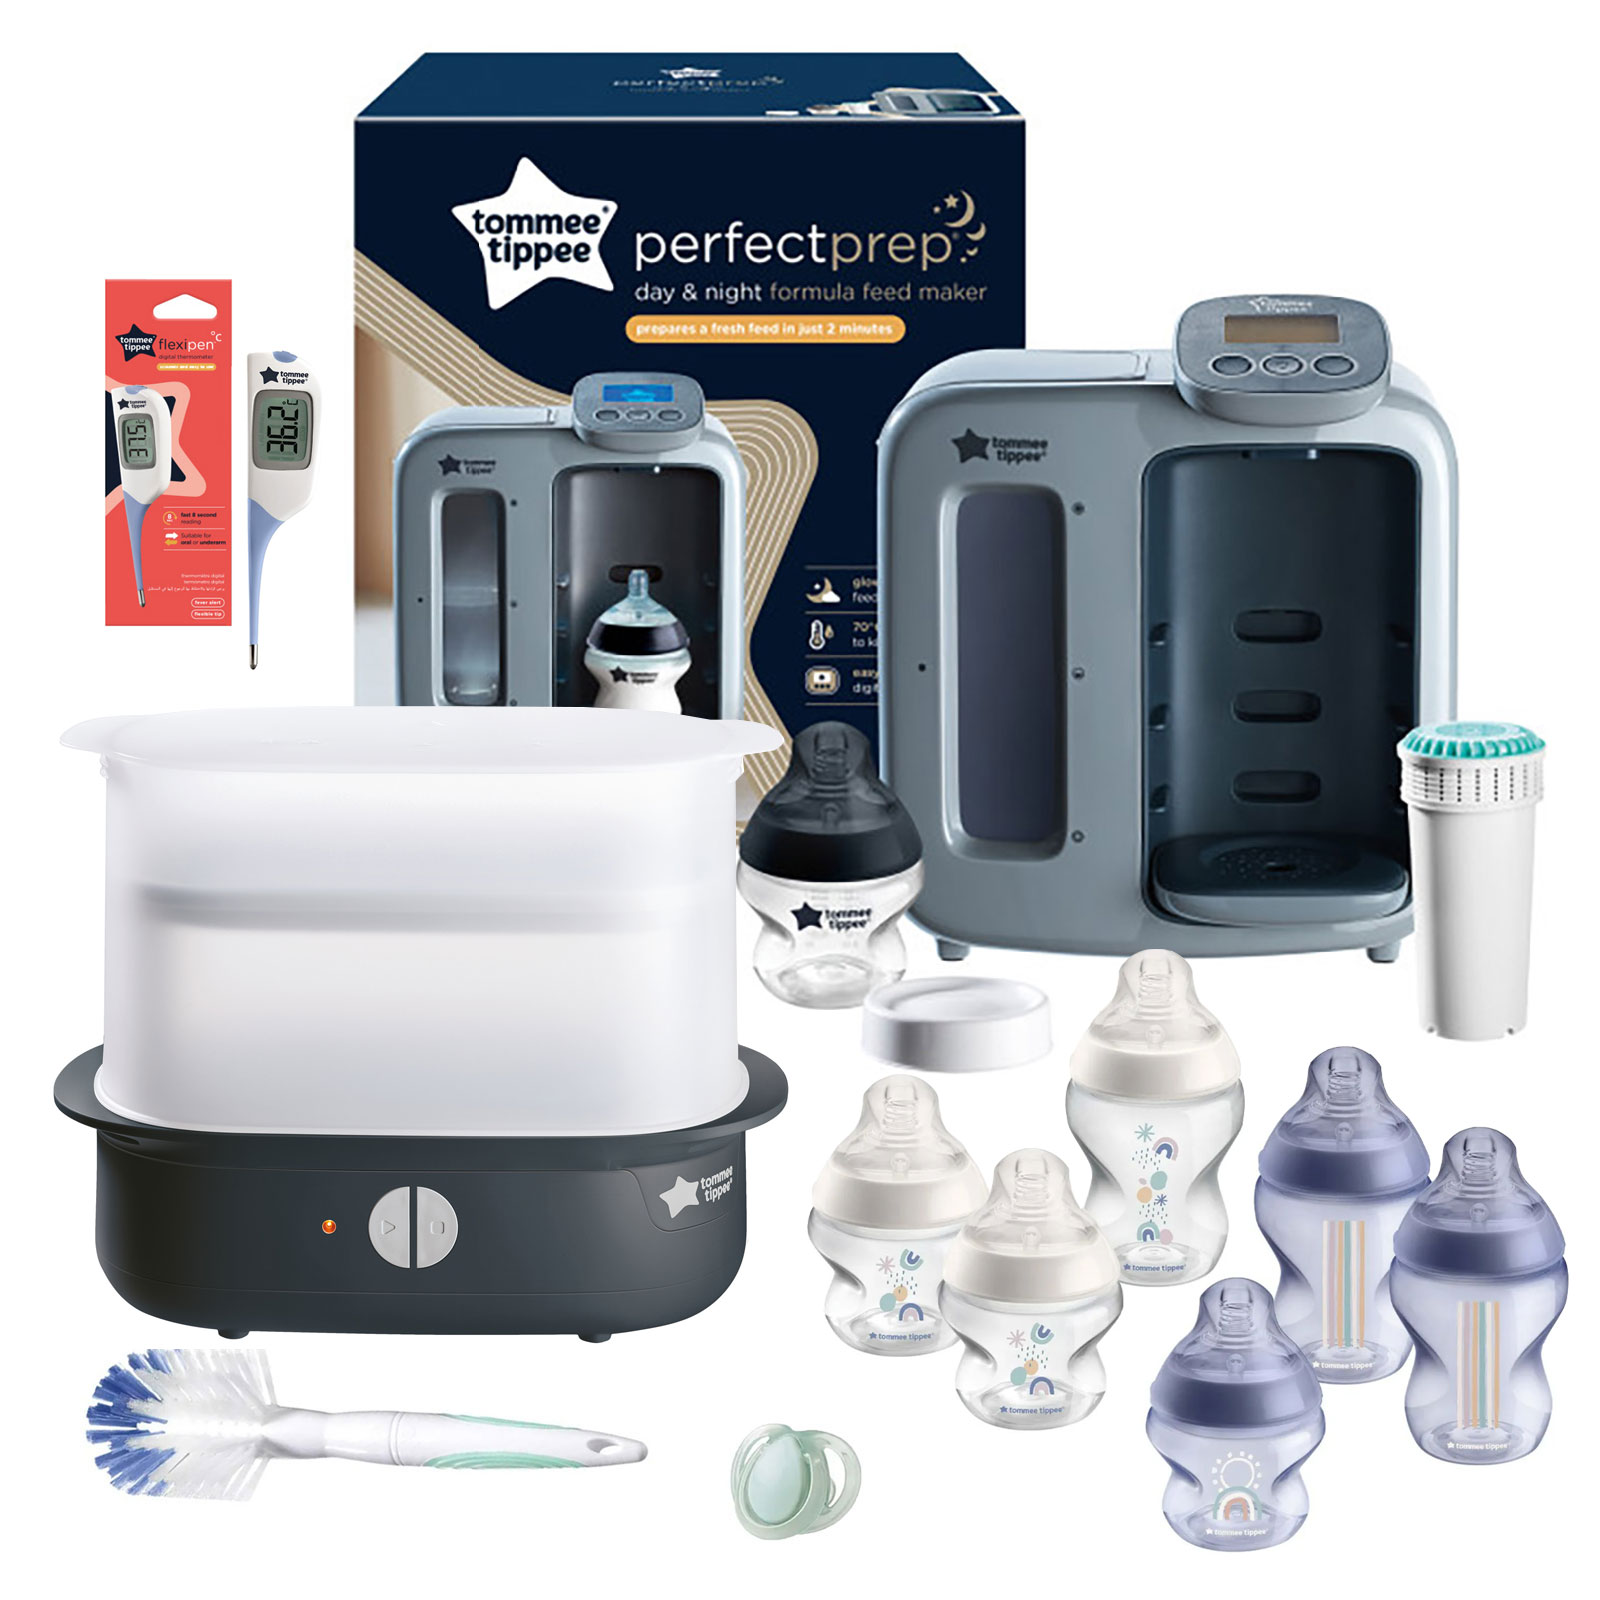 Tommee Tippee Perfect Prep Machine Instant Baby Bottle Maker Feeding Bundle with Thermometer - Grey